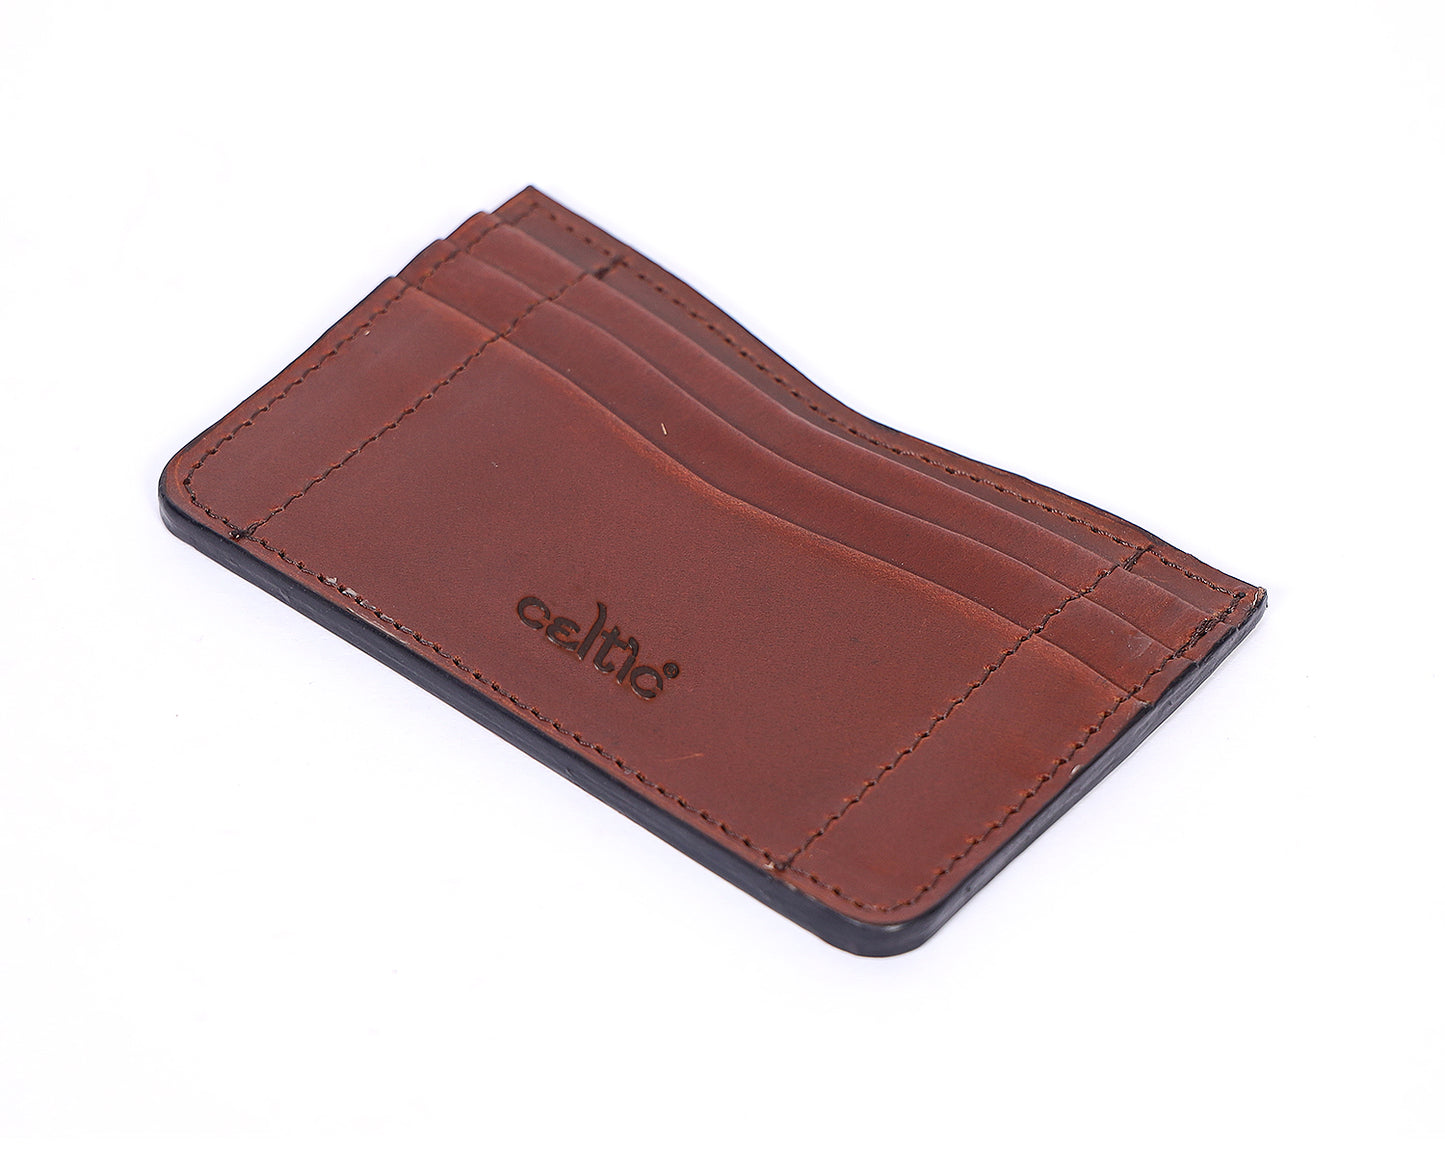 Elegant Brown Leather Card Holder: A Stylish Essential for Your Cards. - CELTICINDIA